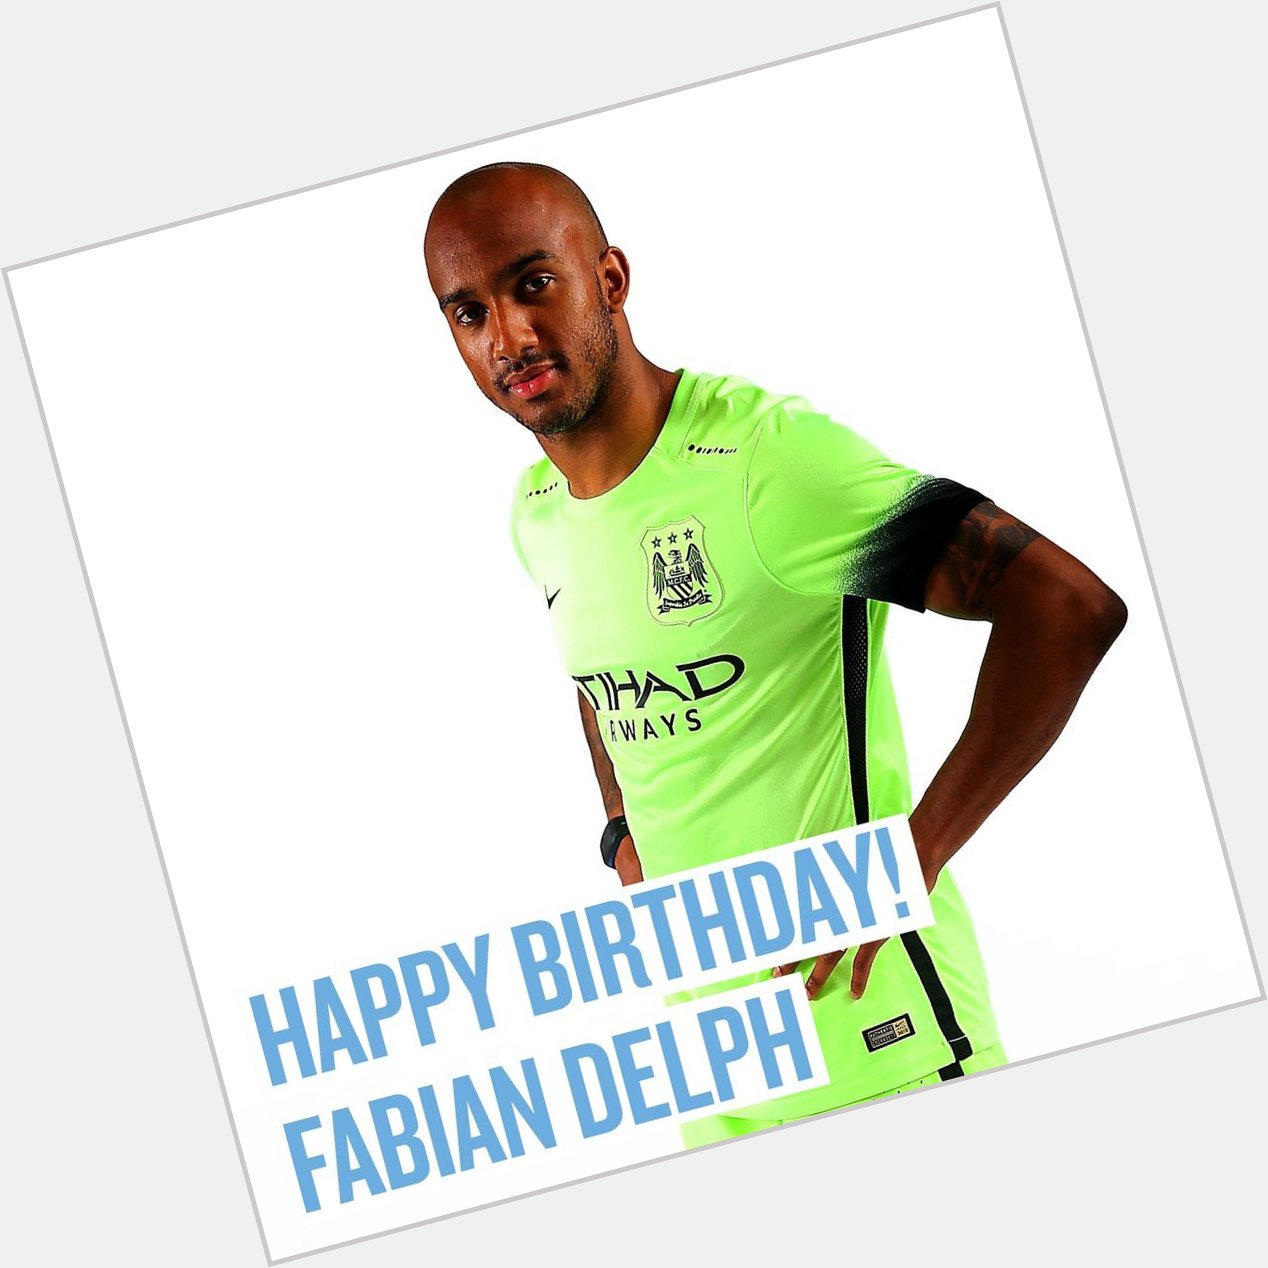 Happy Birthday to Fabian Delph, who turned 26 today! 